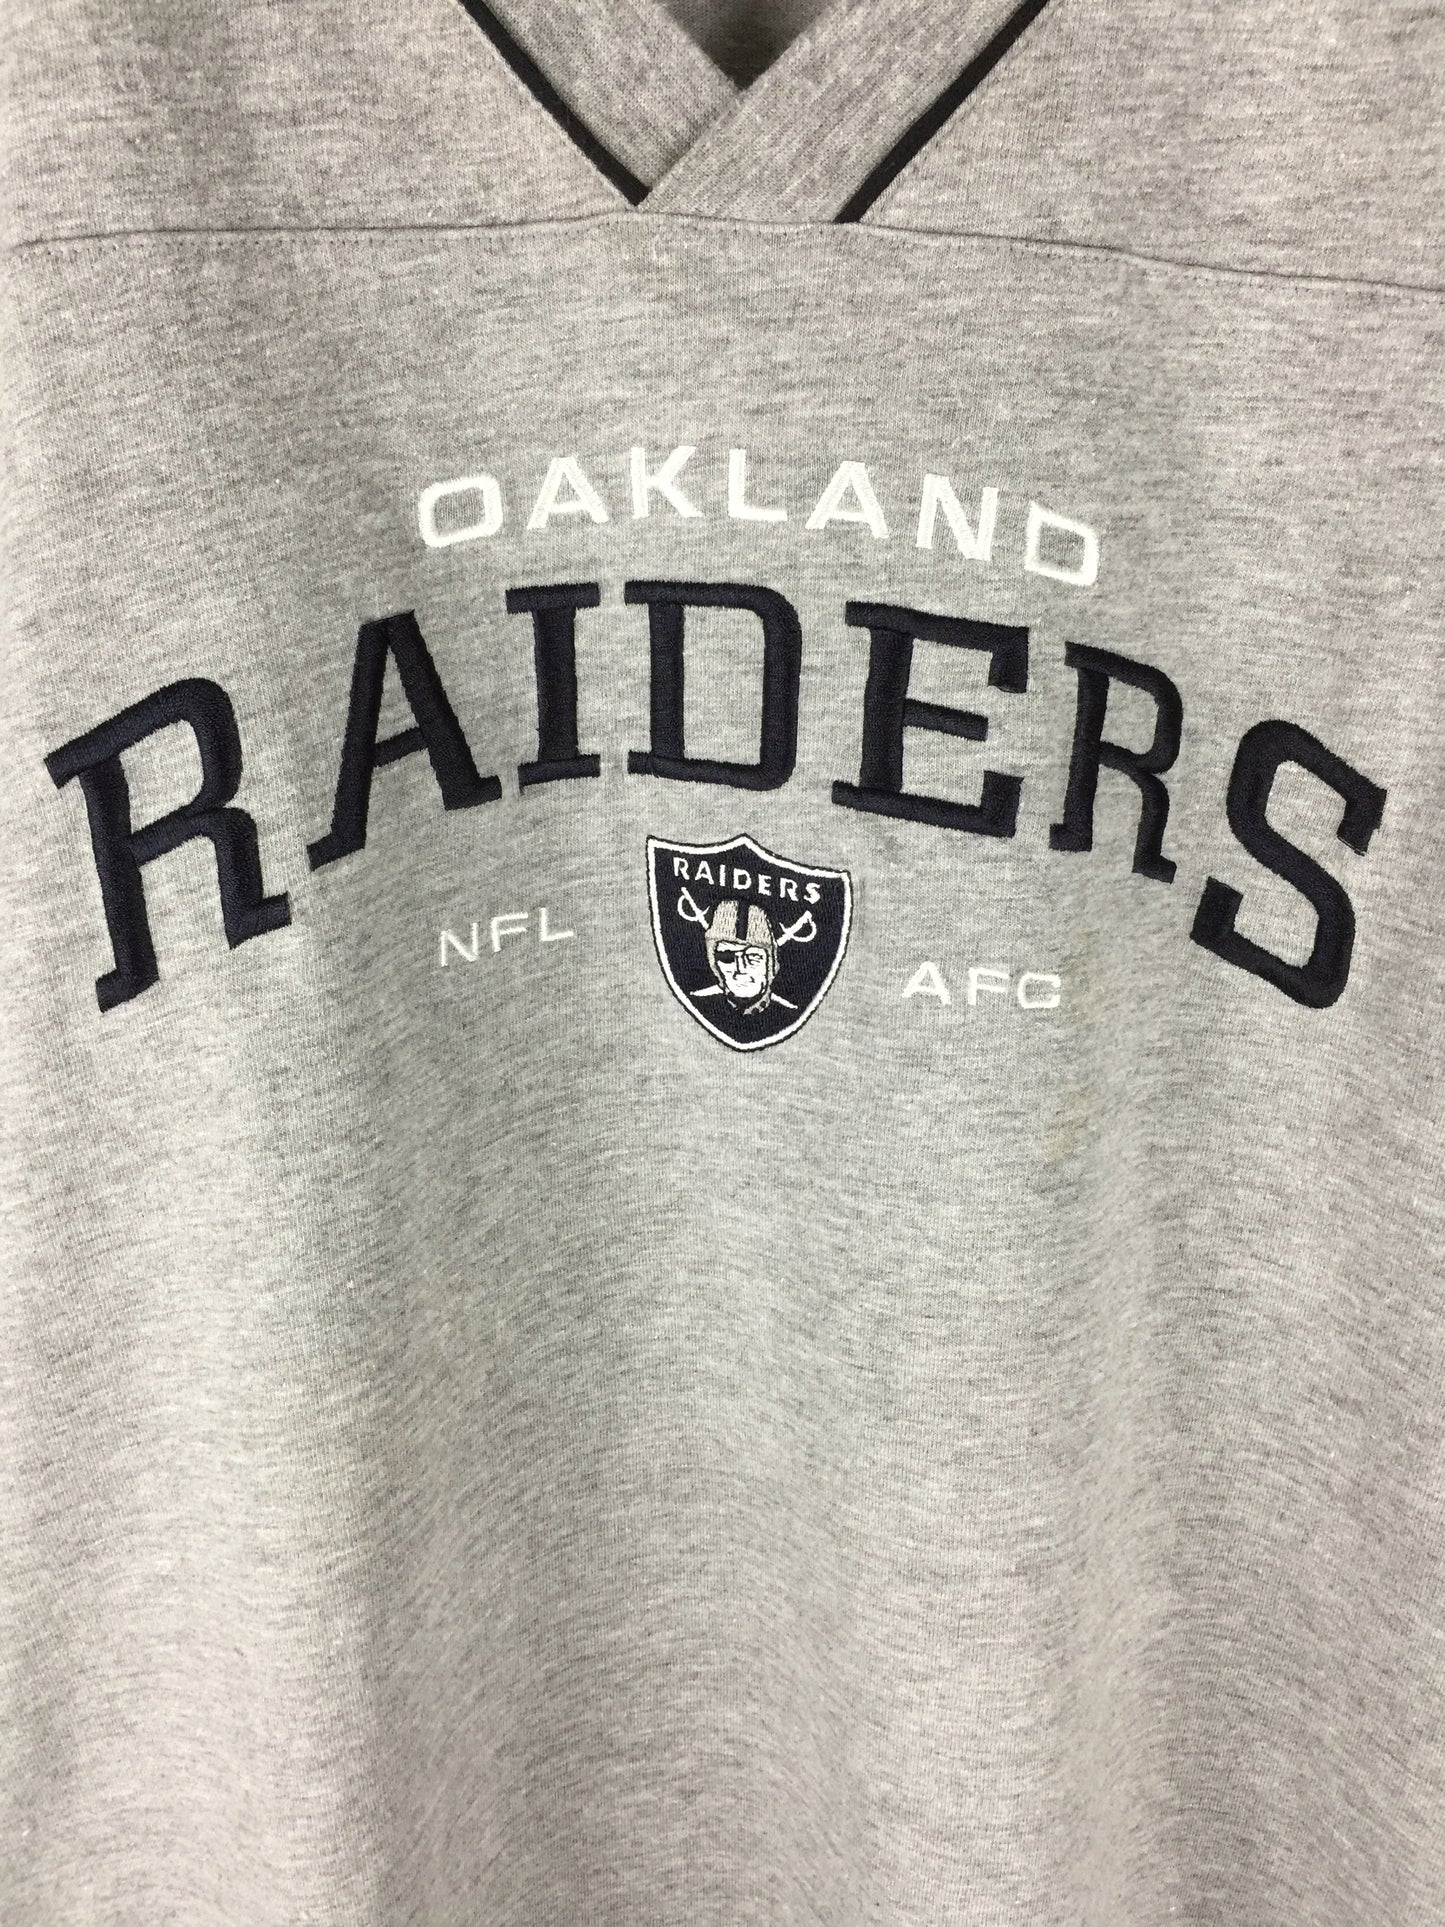 Vintage Oakland Raiders 00s NFL embroidered T-shirt